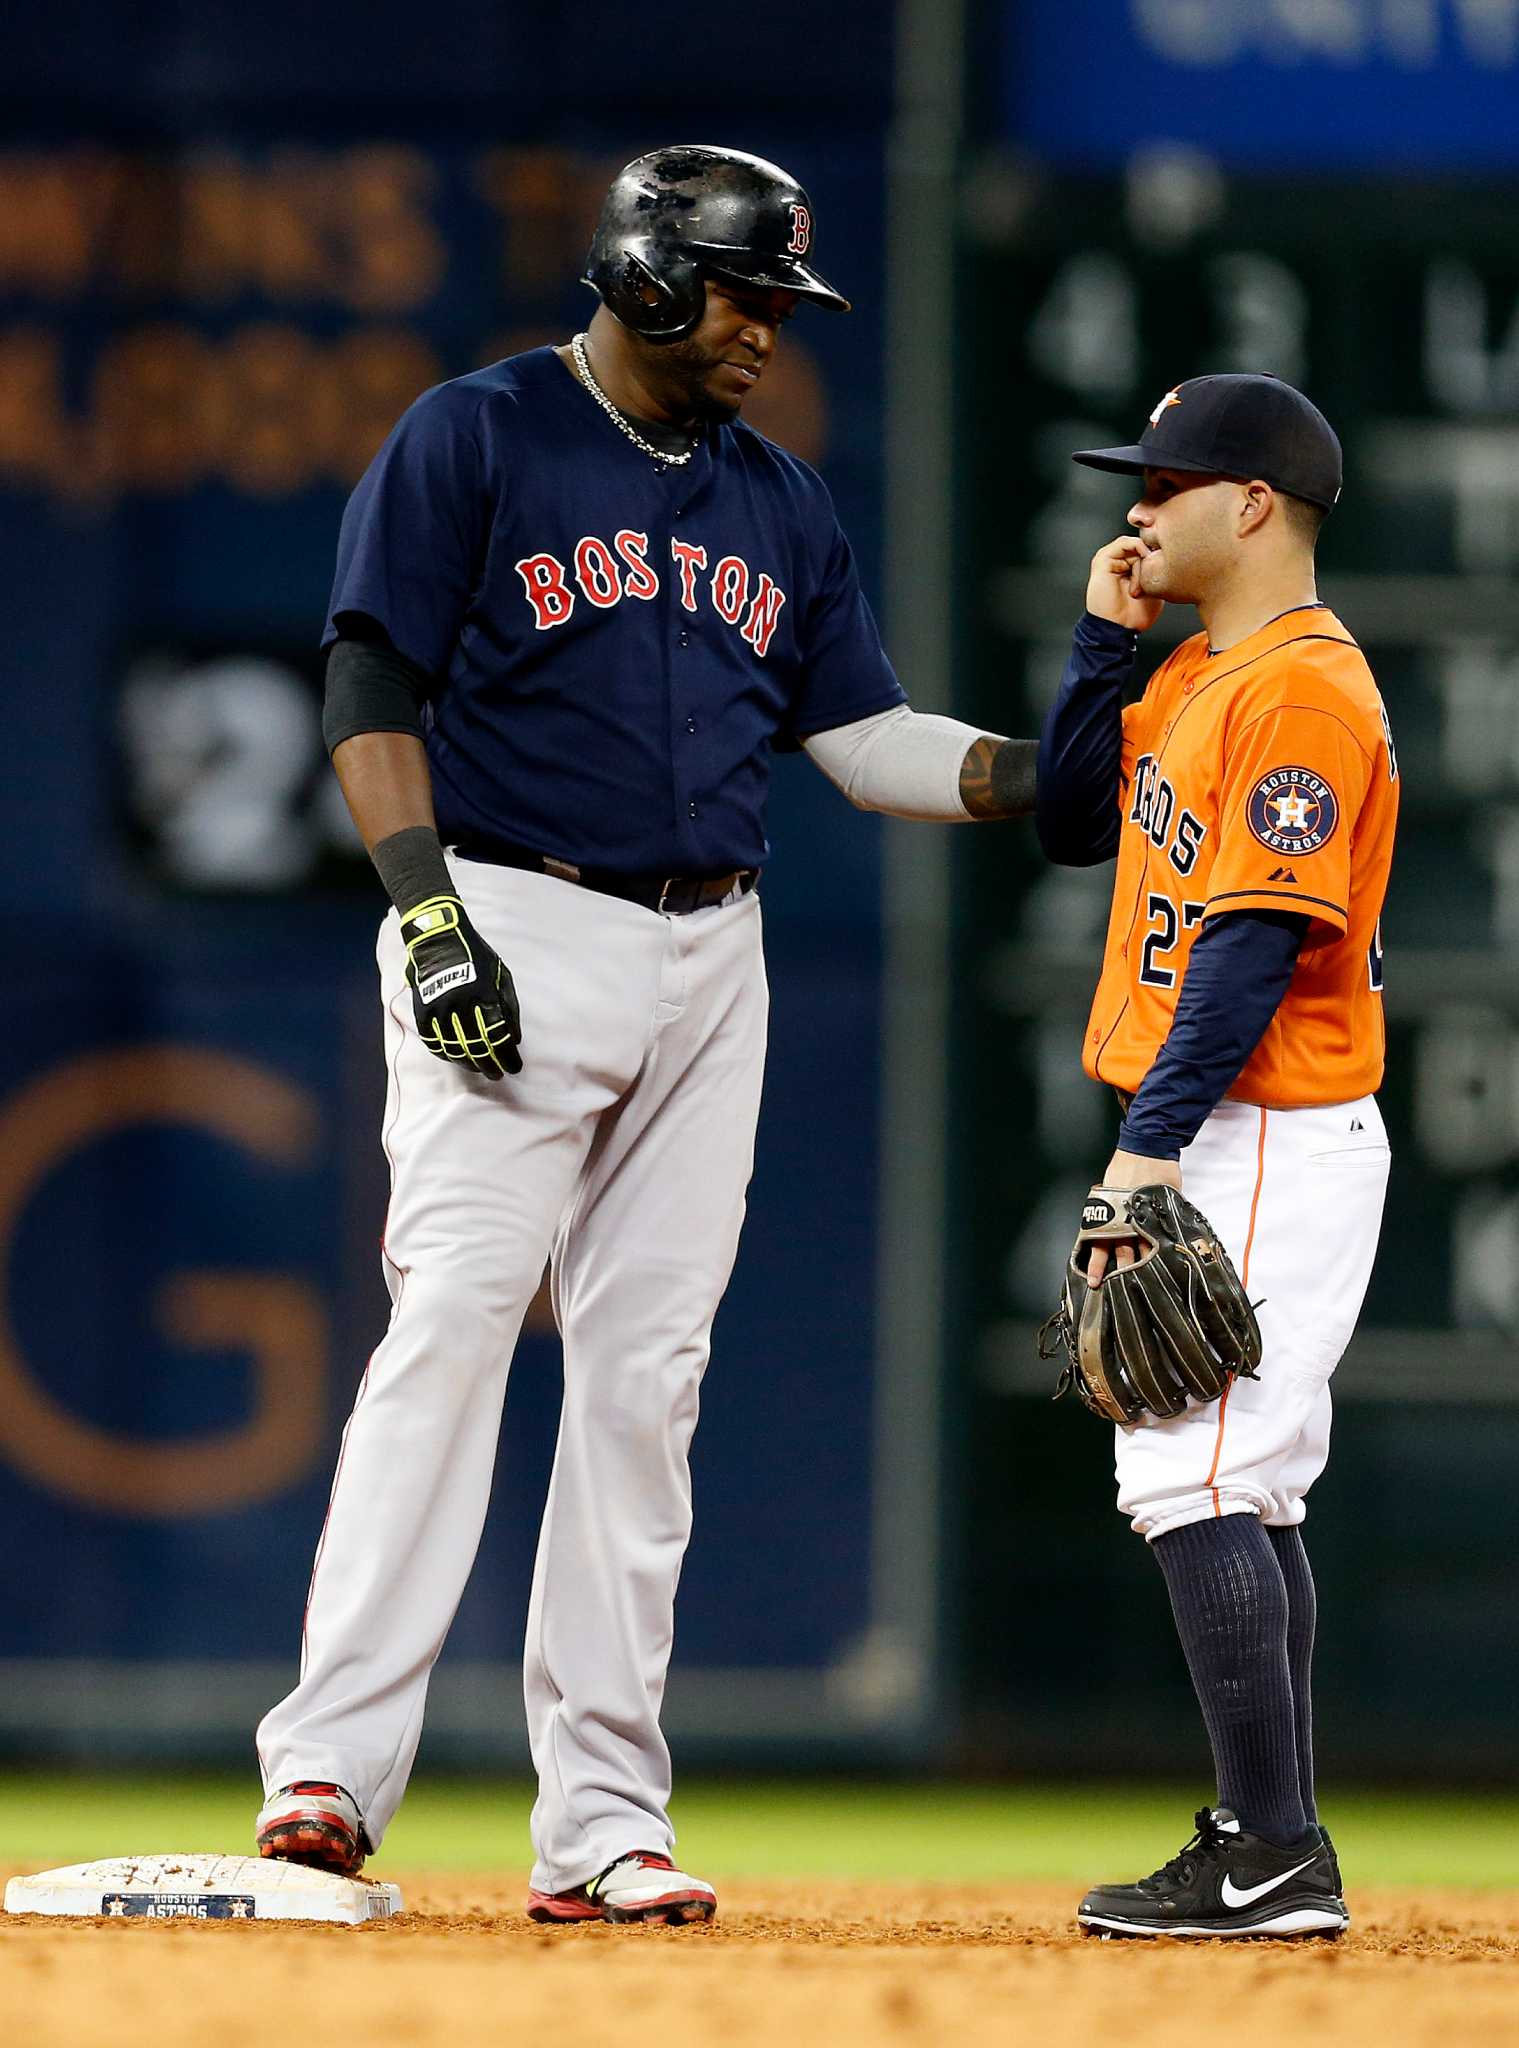 Novelty no more: Astros' Jose Altuve in the conversation as one of